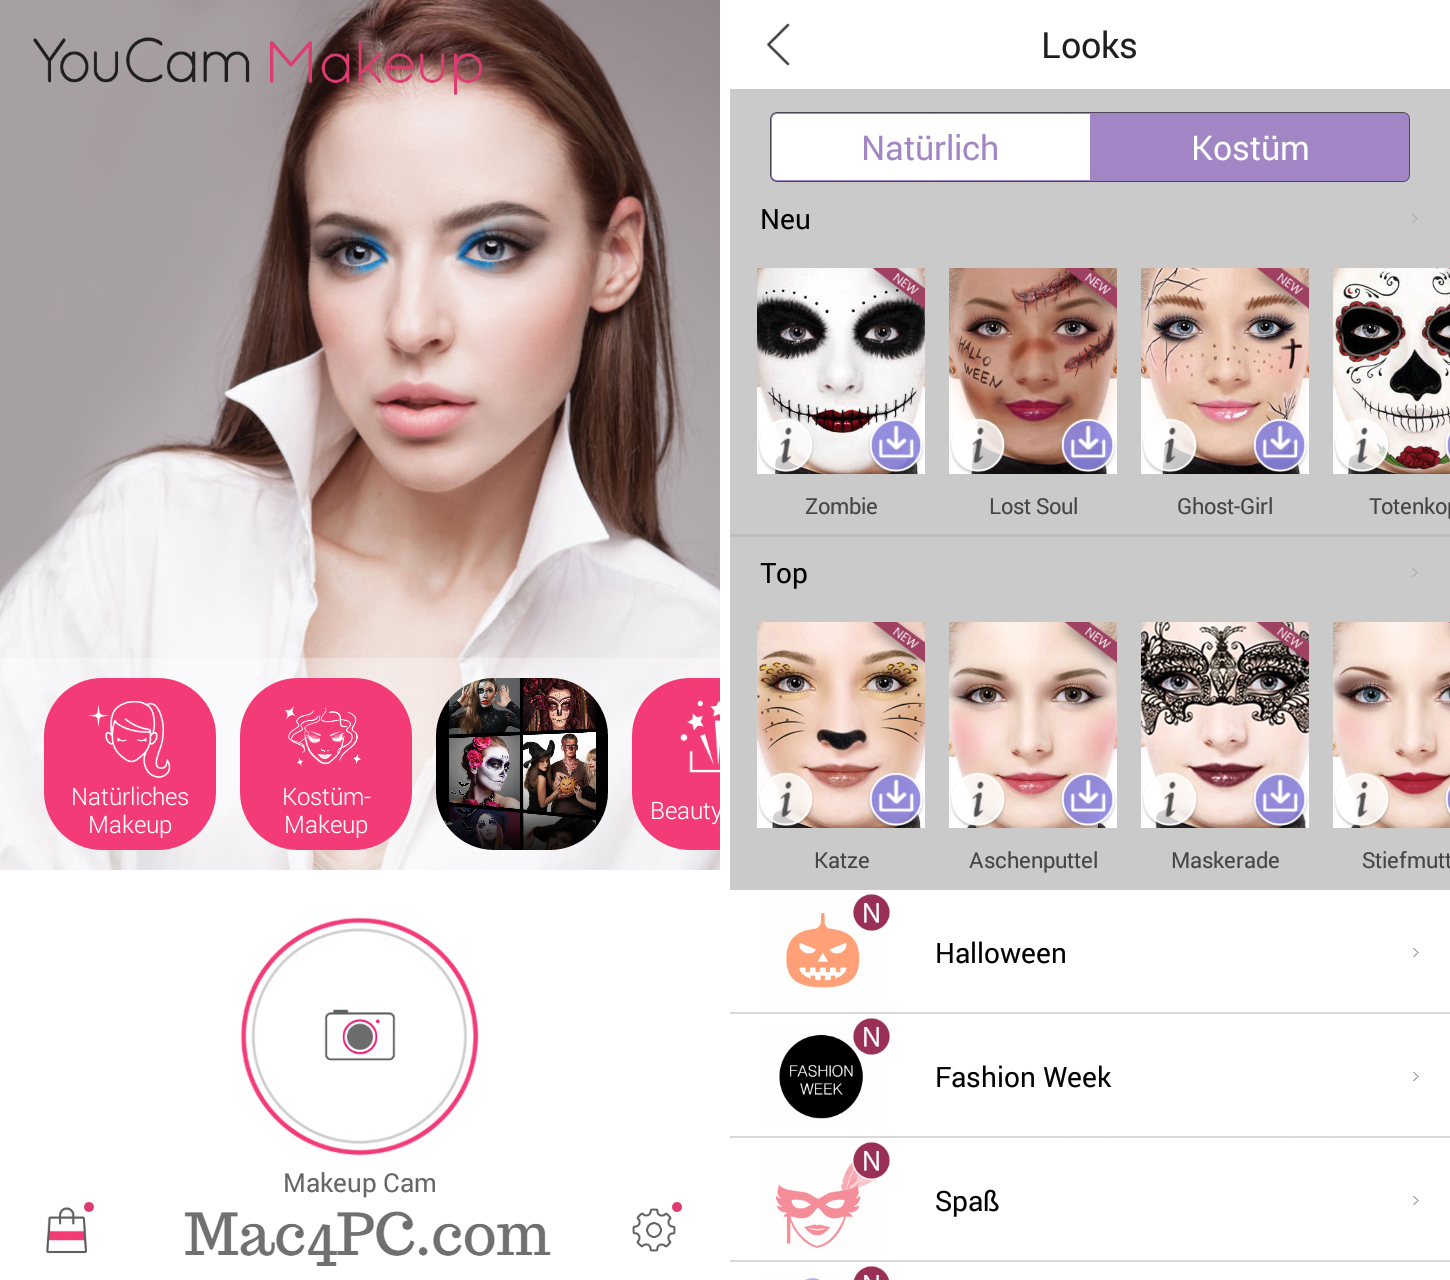 YouCam Makeup Pro 5.96.3 Cracked For Mac With MOD APK Free Download